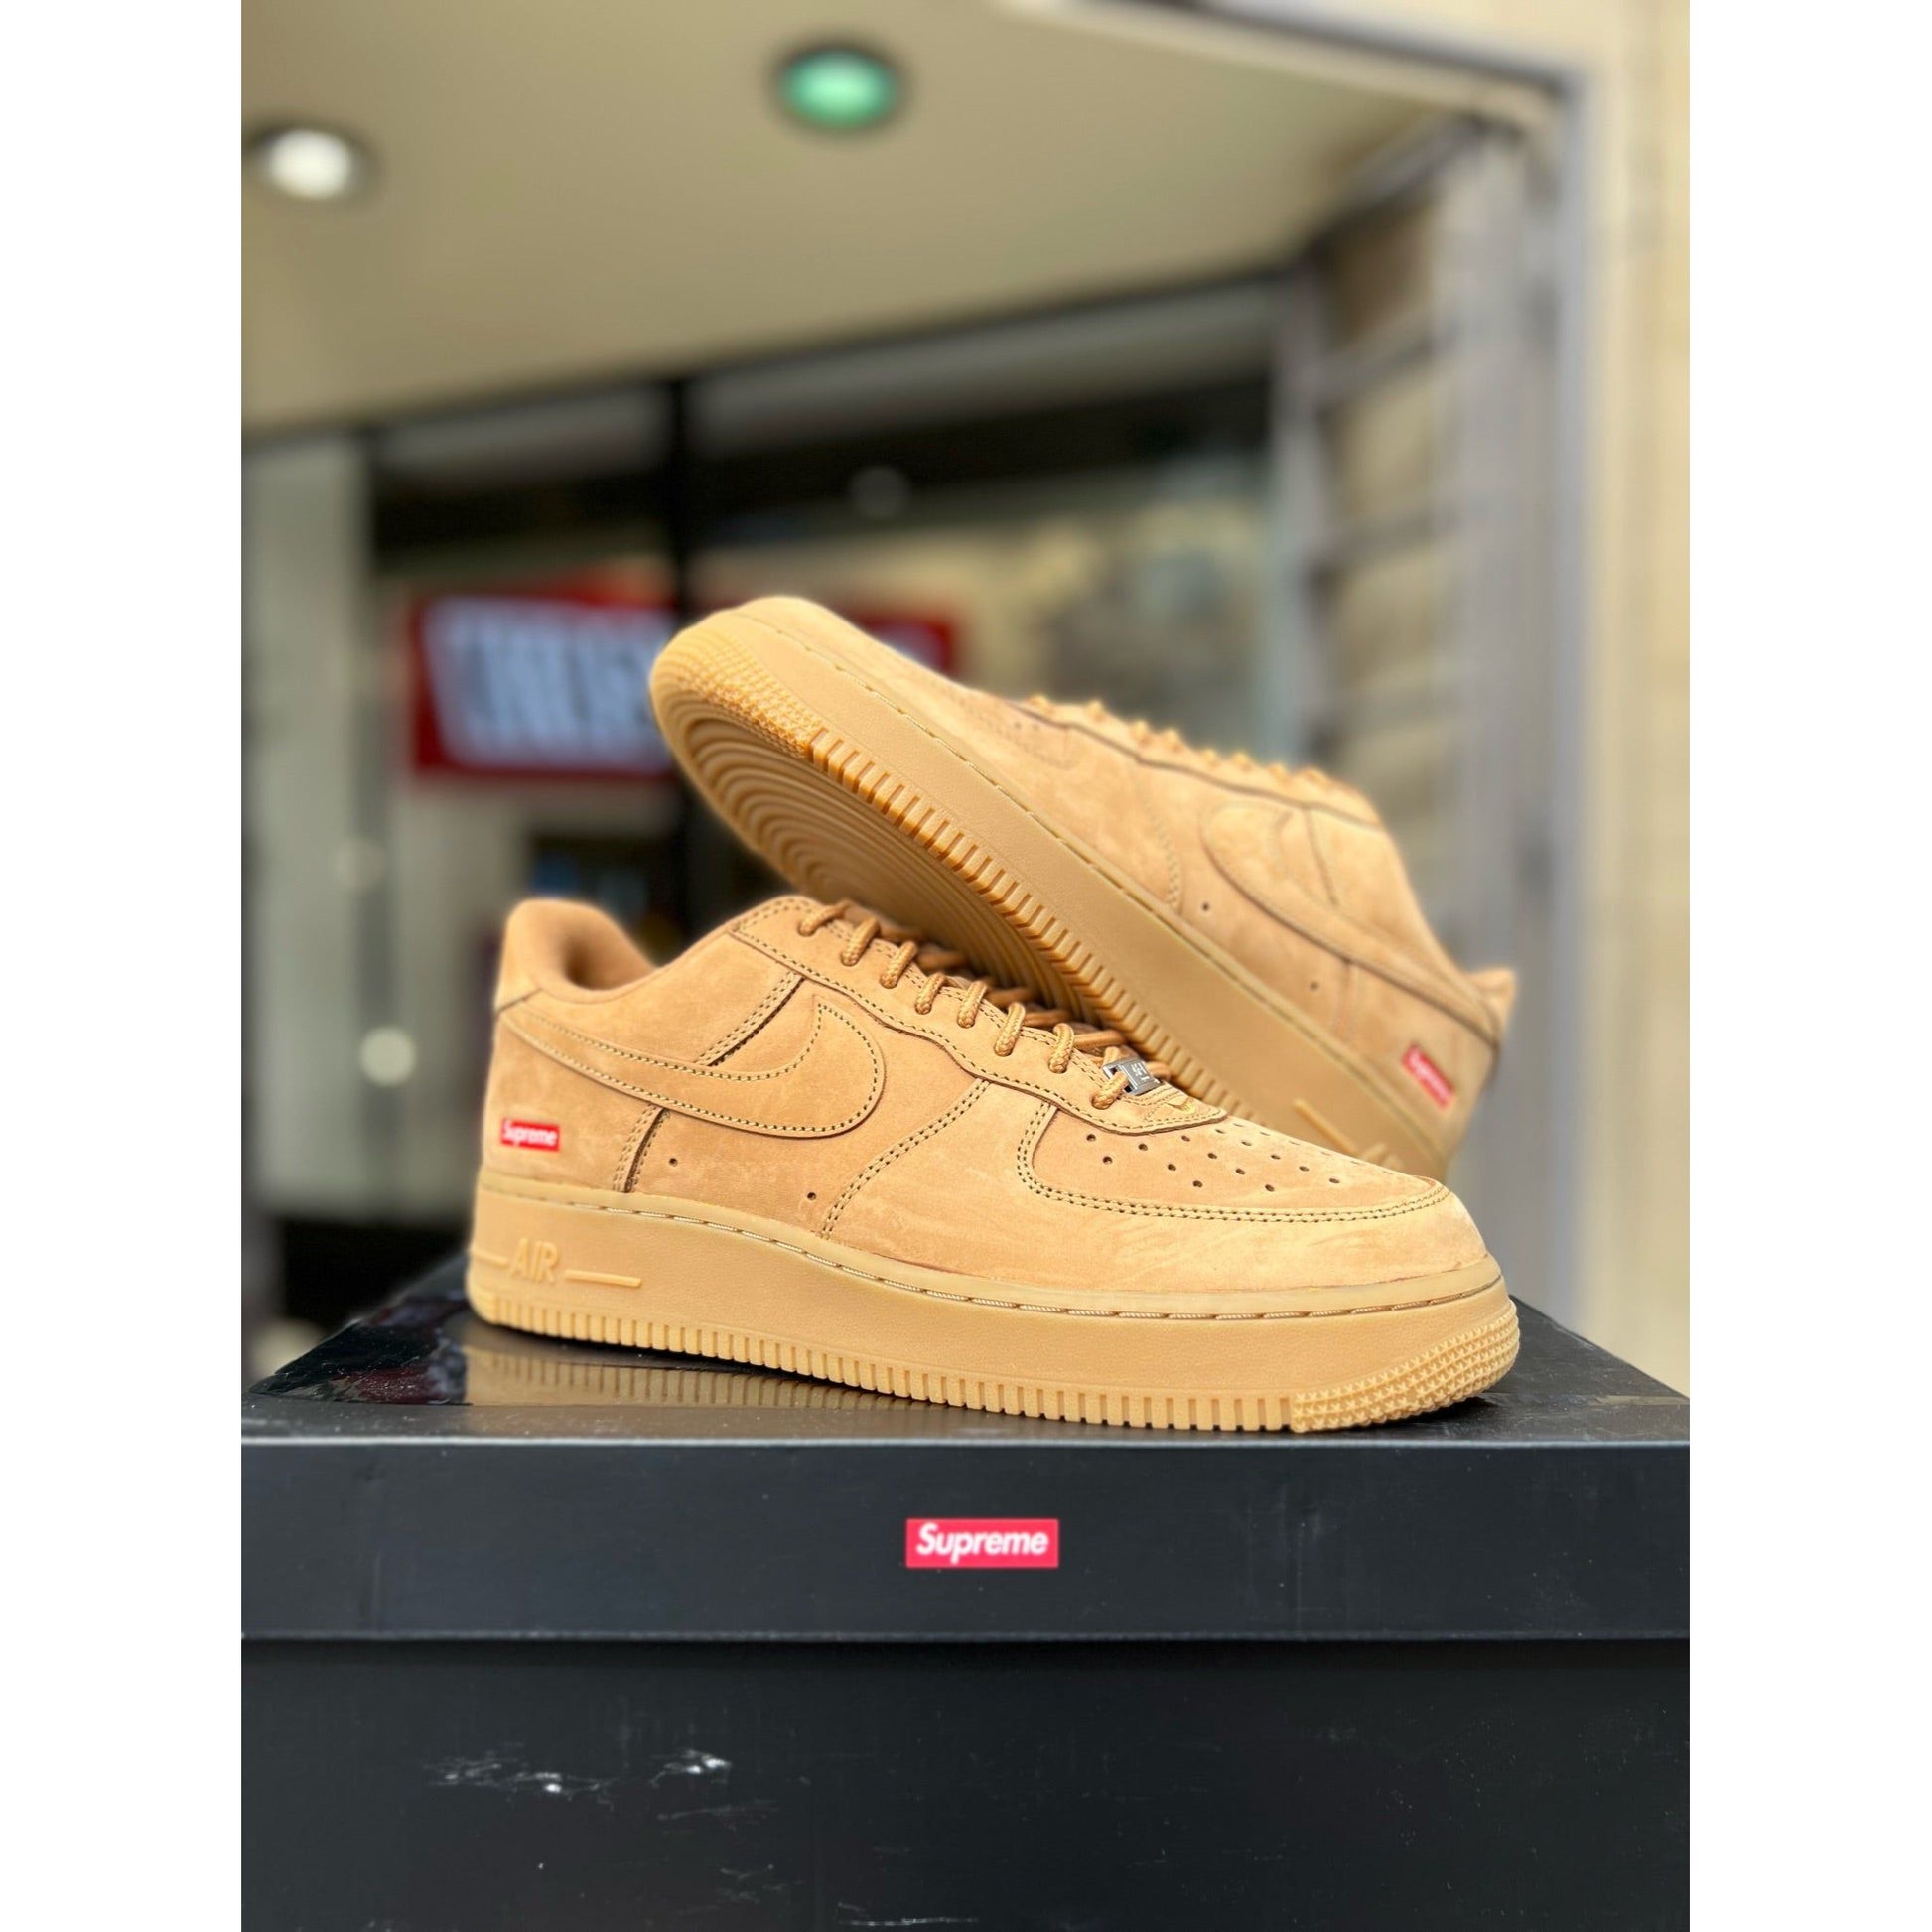 Nike Air Force 1 Low SP Supreme Wheat by Nike from £200.00